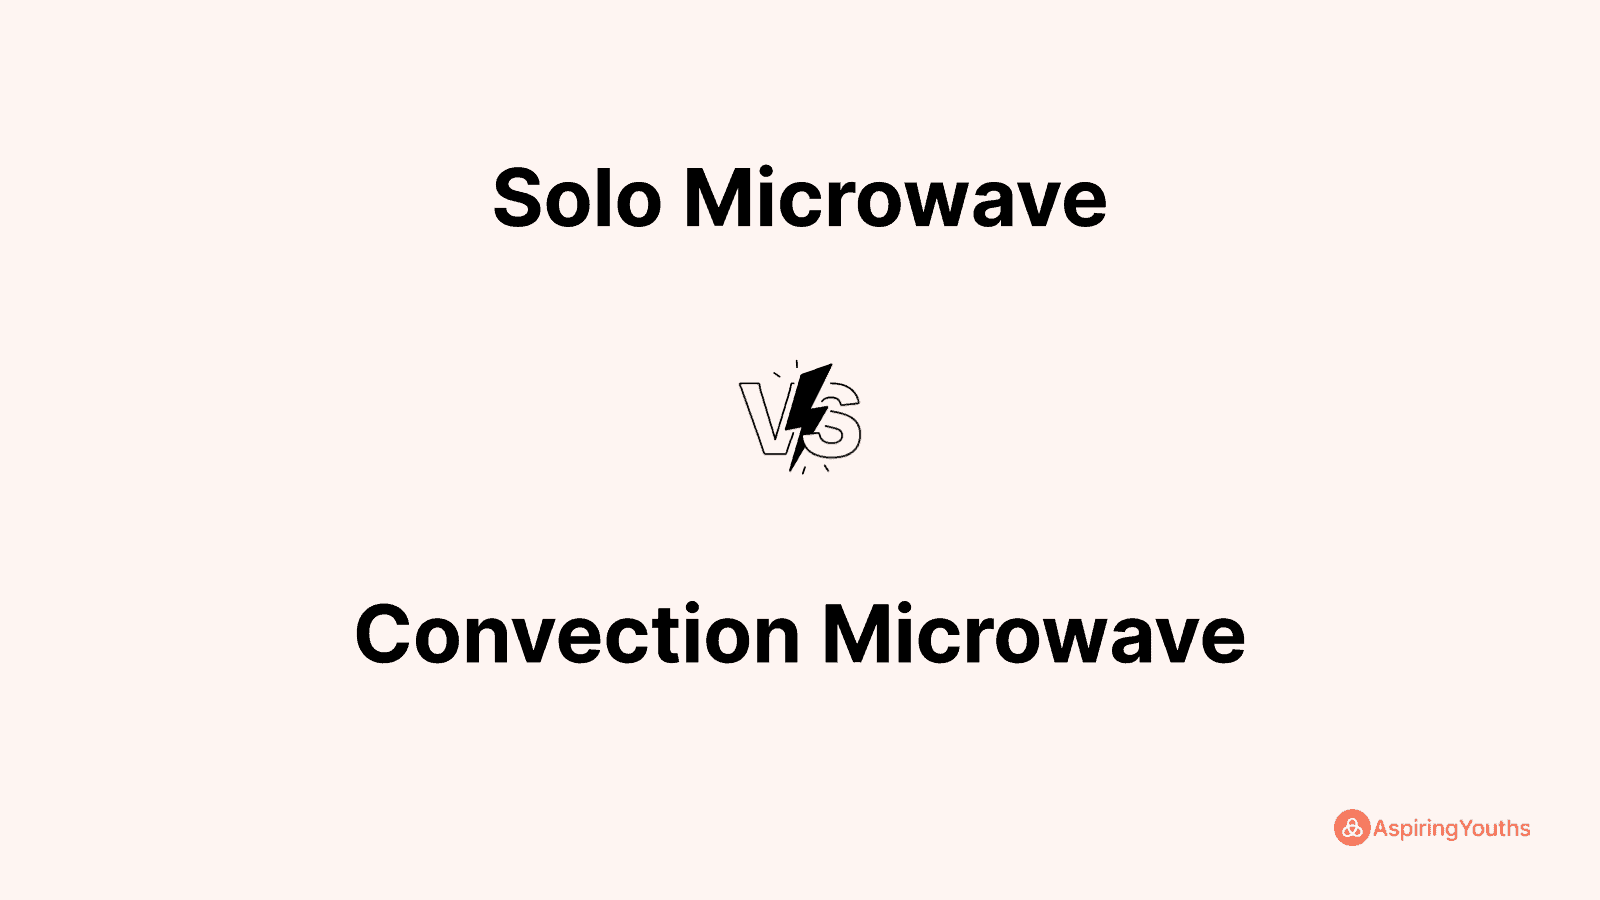 Solo Microwave vs Convection Microwave